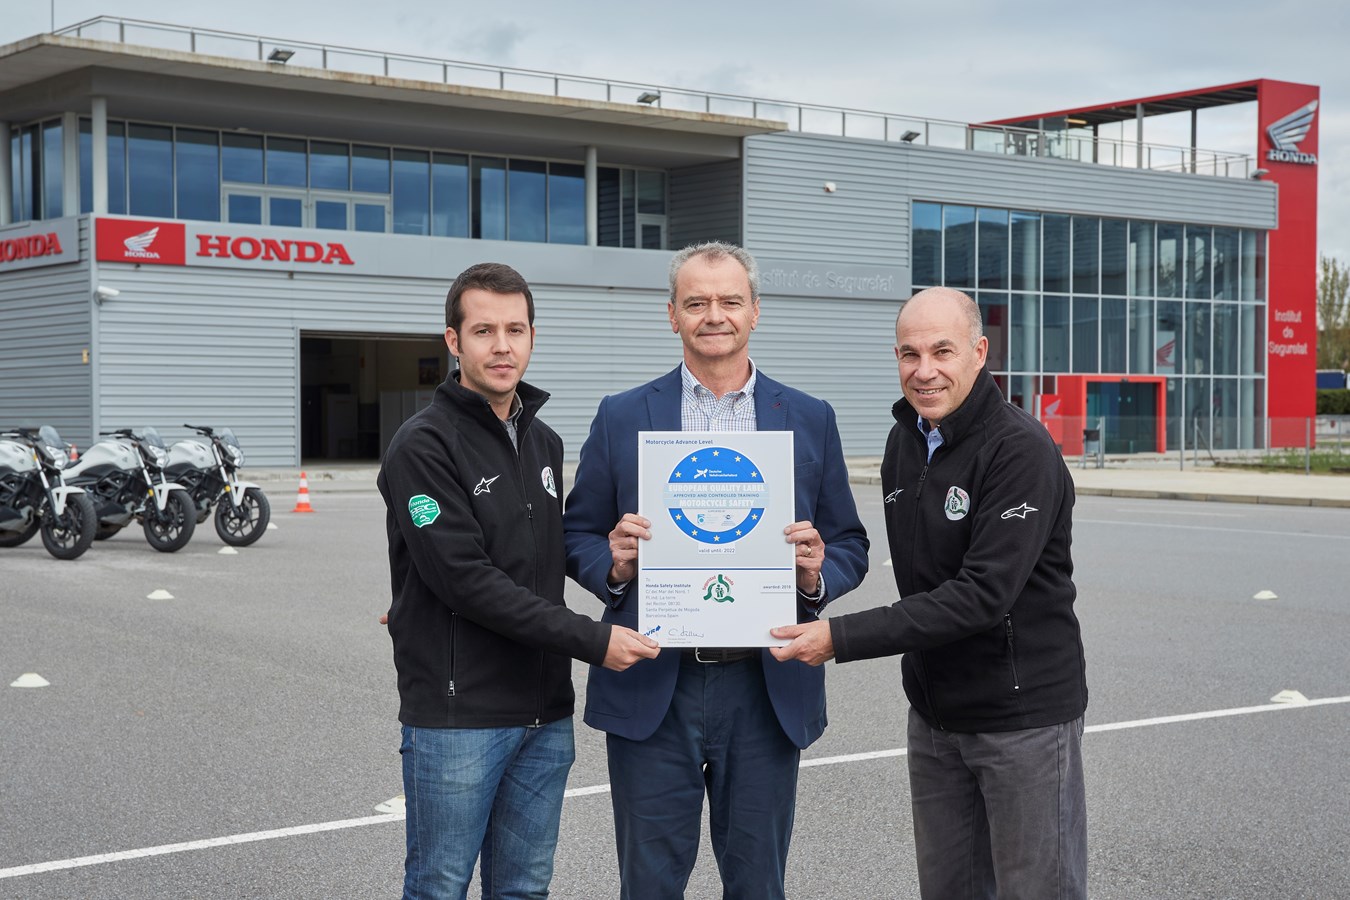  Honda Safety Institute receives the European Training Quality Label award